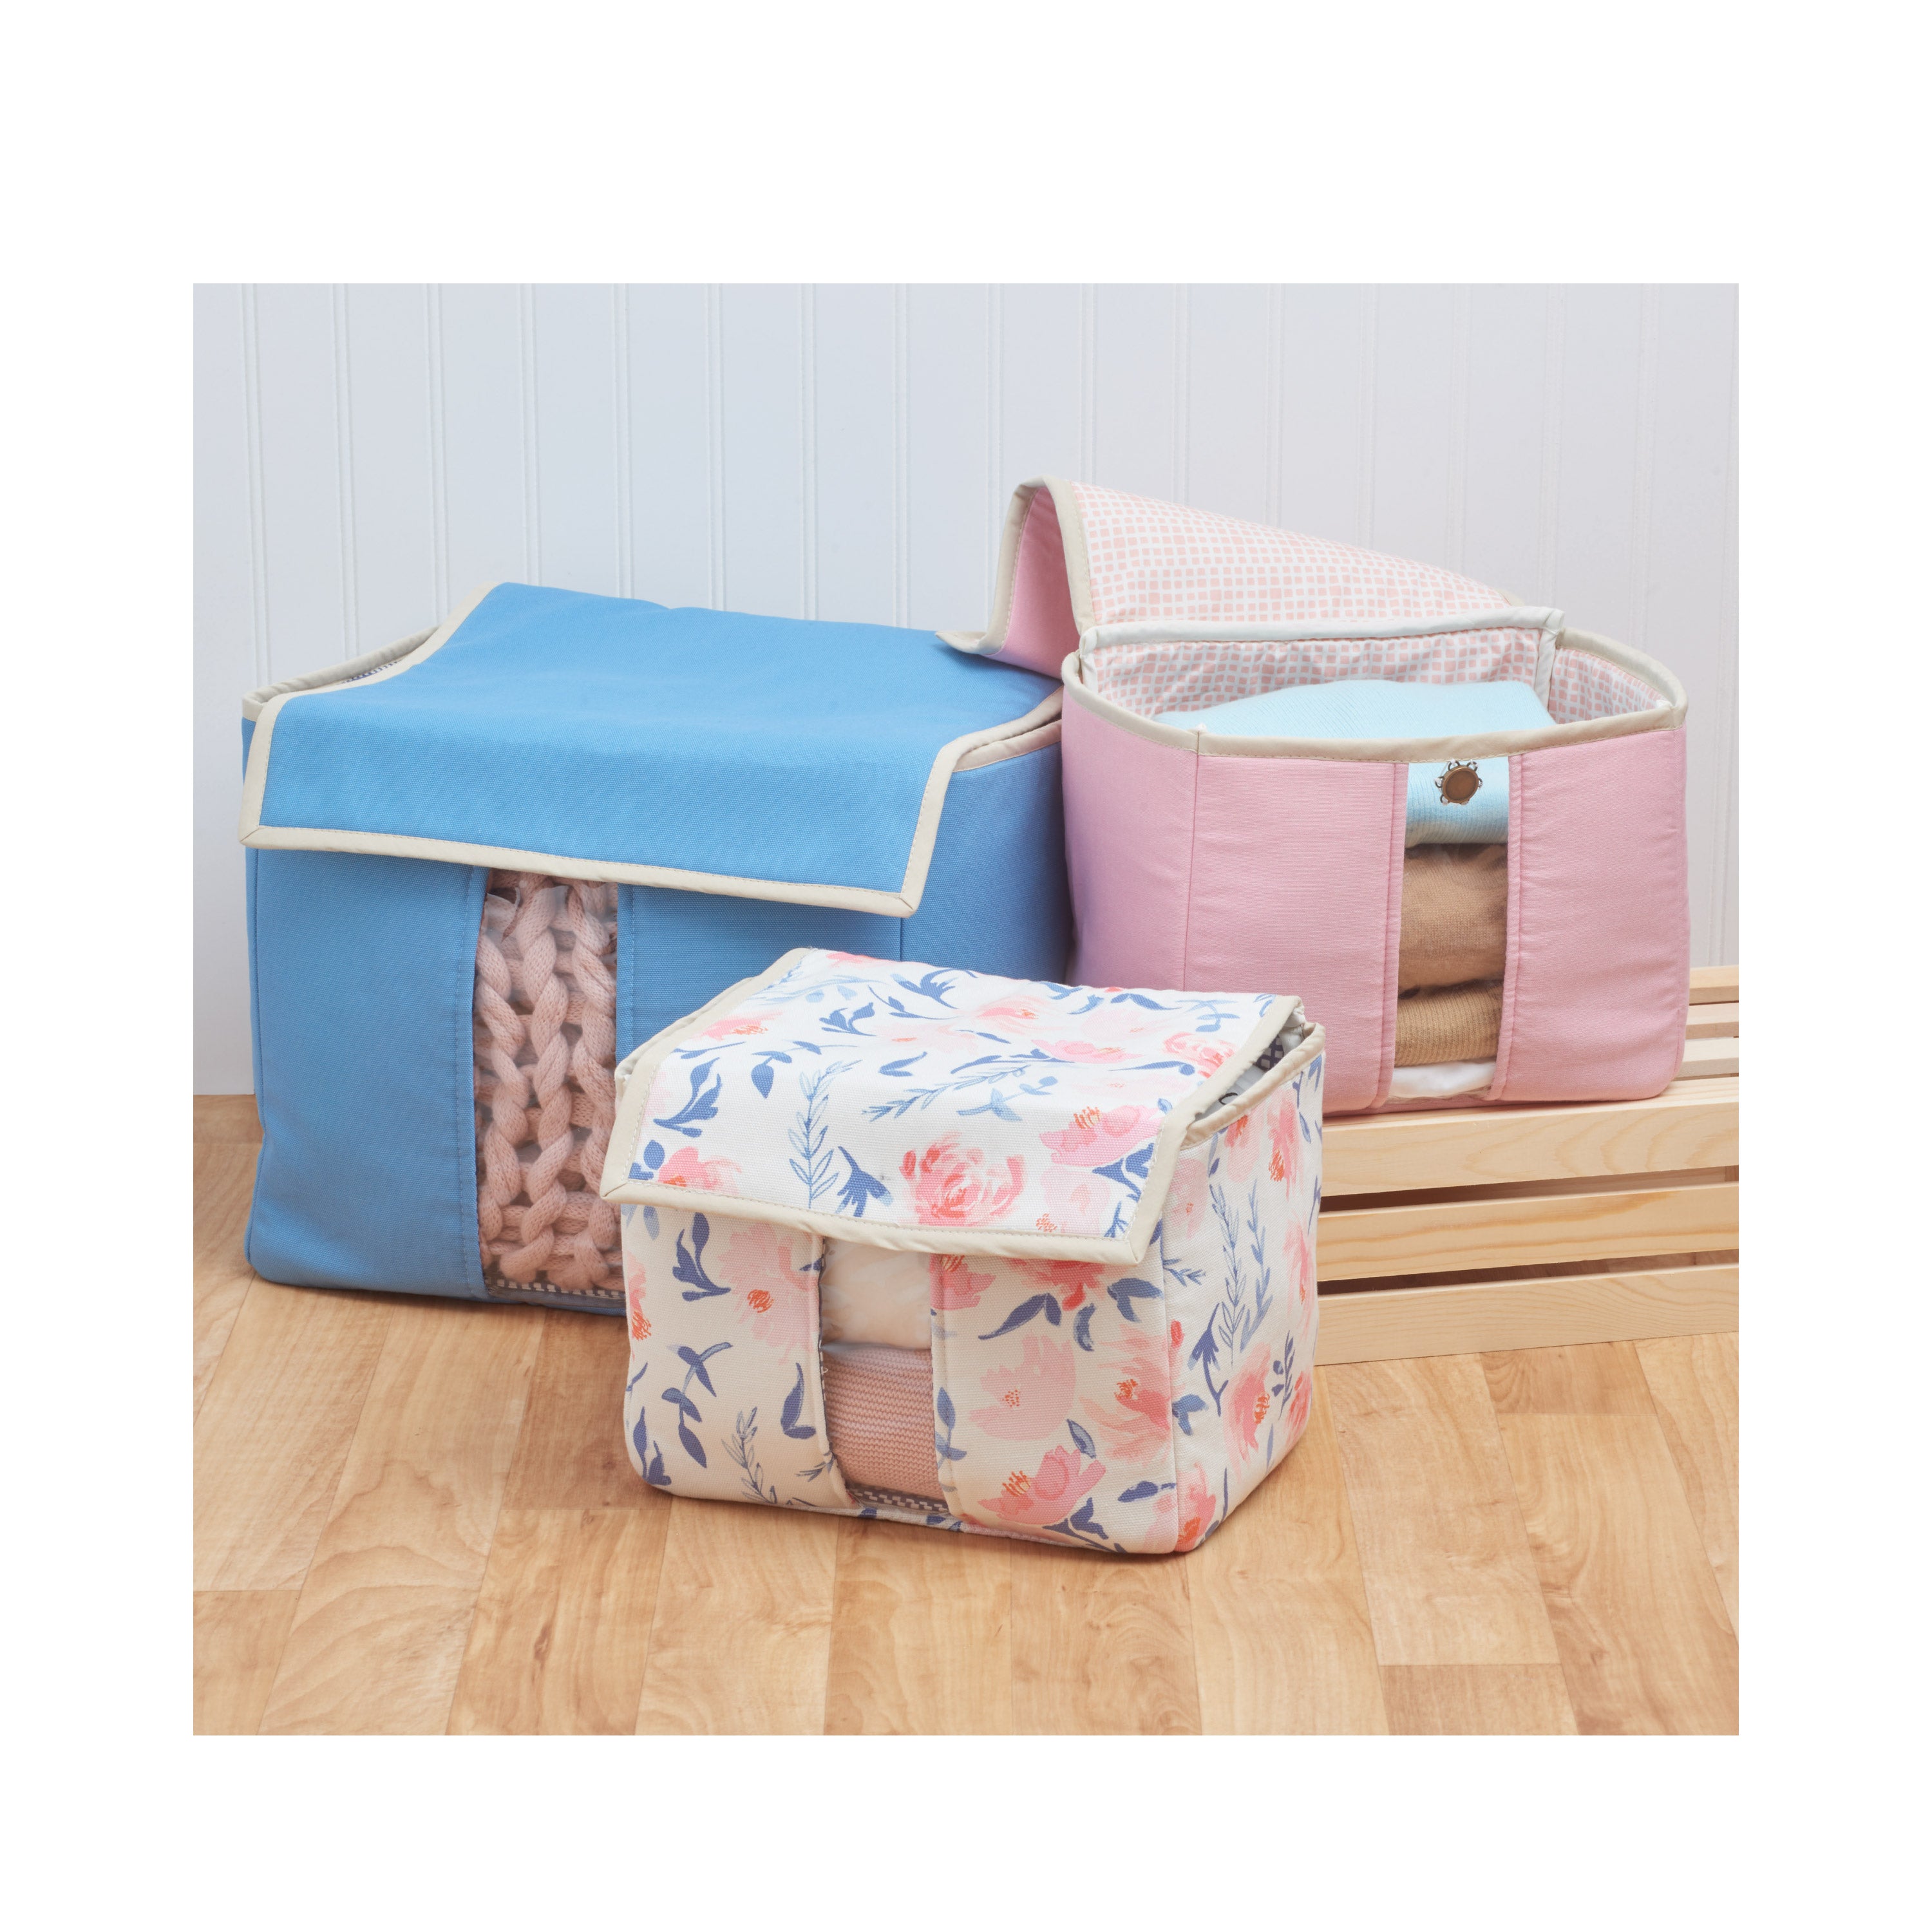 Simplicity 9572 Storage Organizers pattern from Jaycotts Sewing Supplies